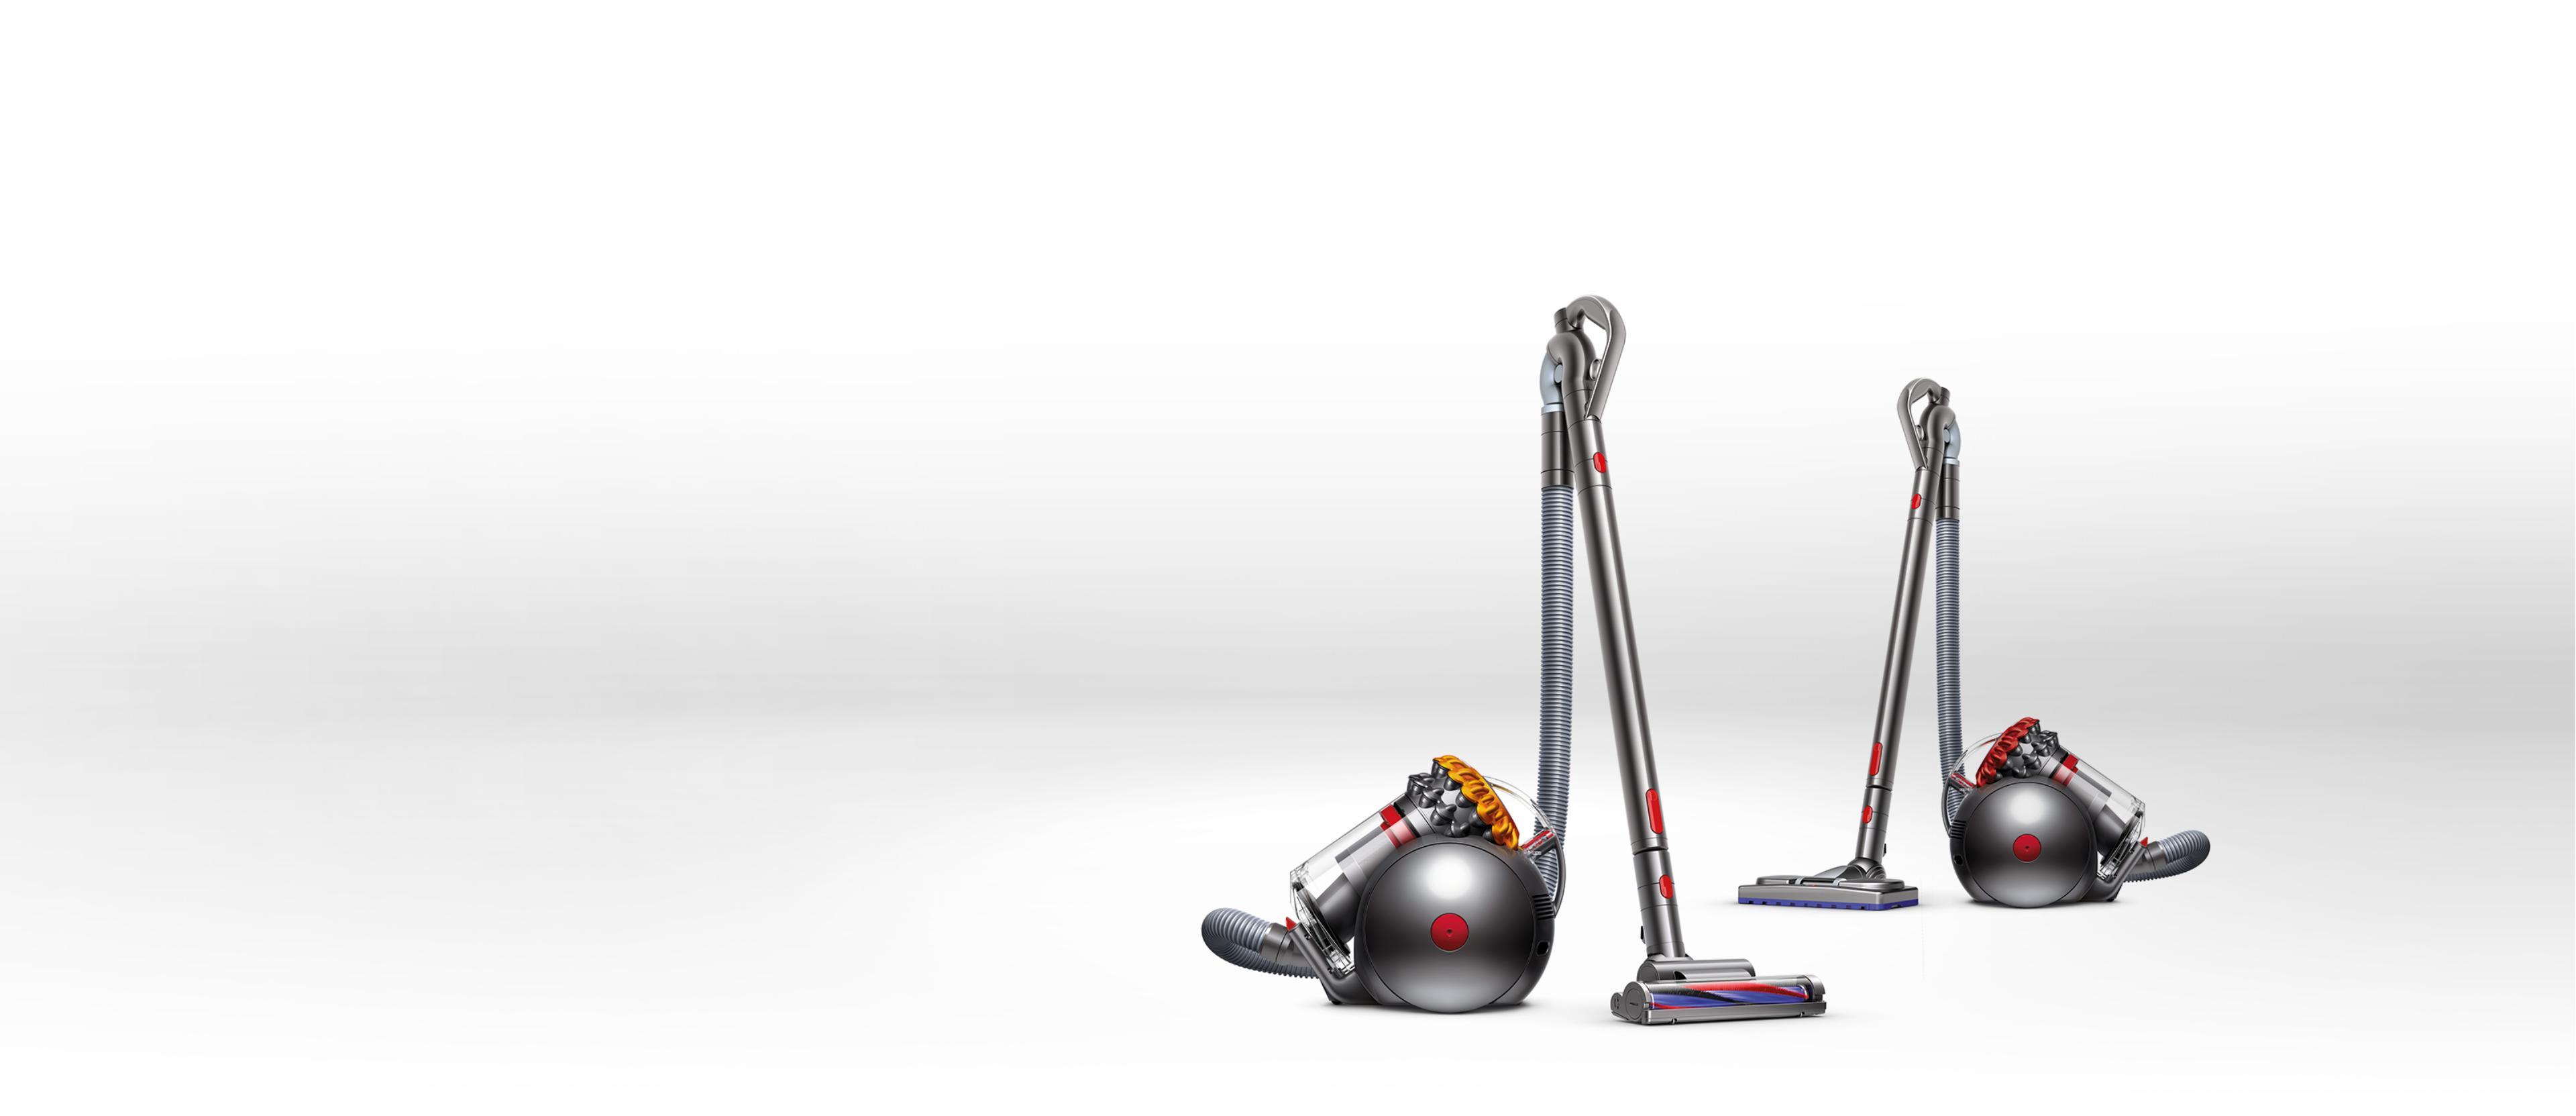 Dyson Big Ball: Overview | Dyson